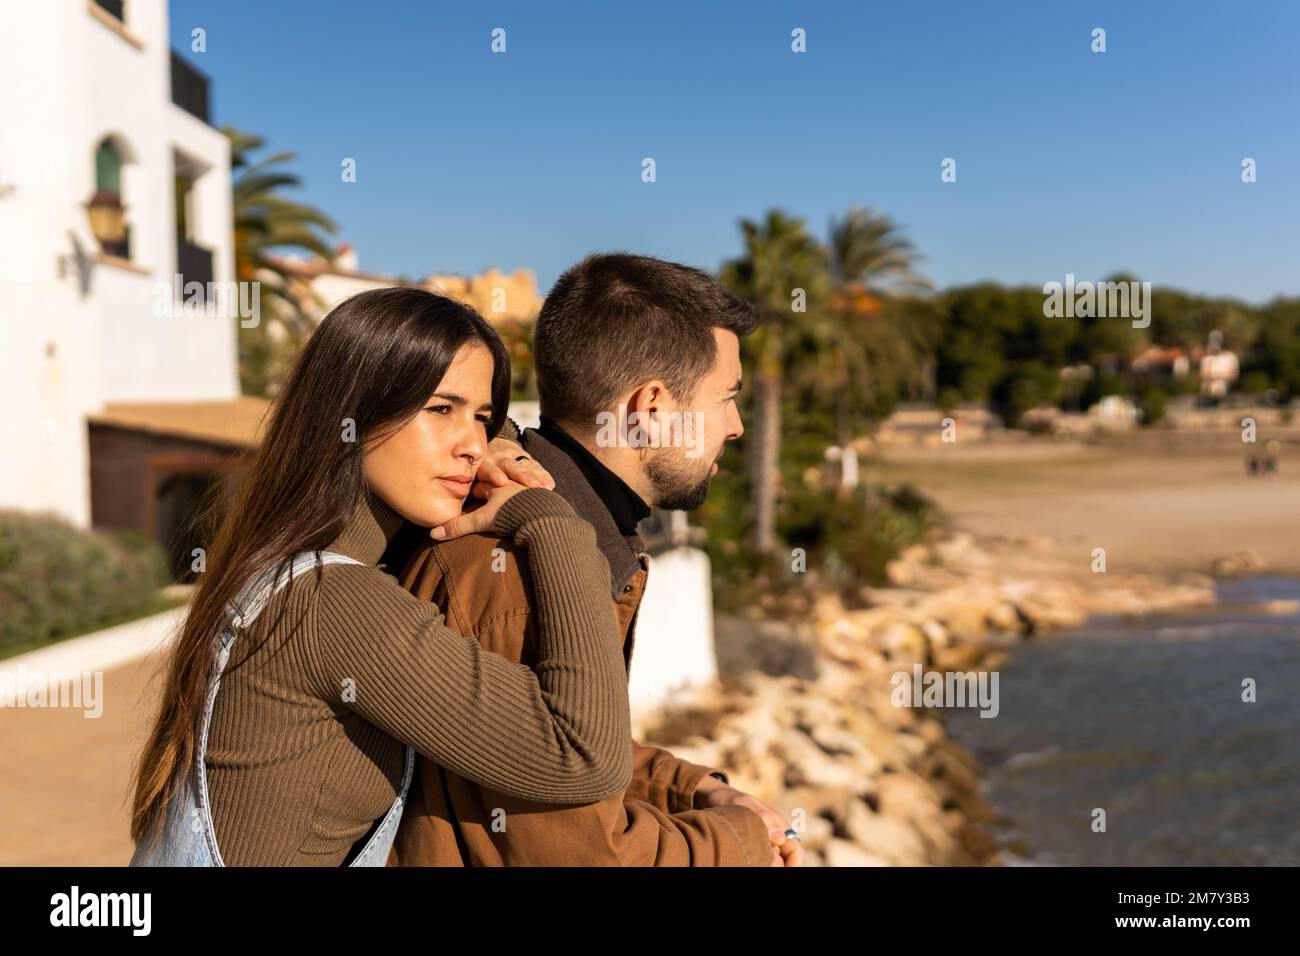 young couple in love embraced enjoy idyllic views together during their honeymoon in paradise Stock Photo